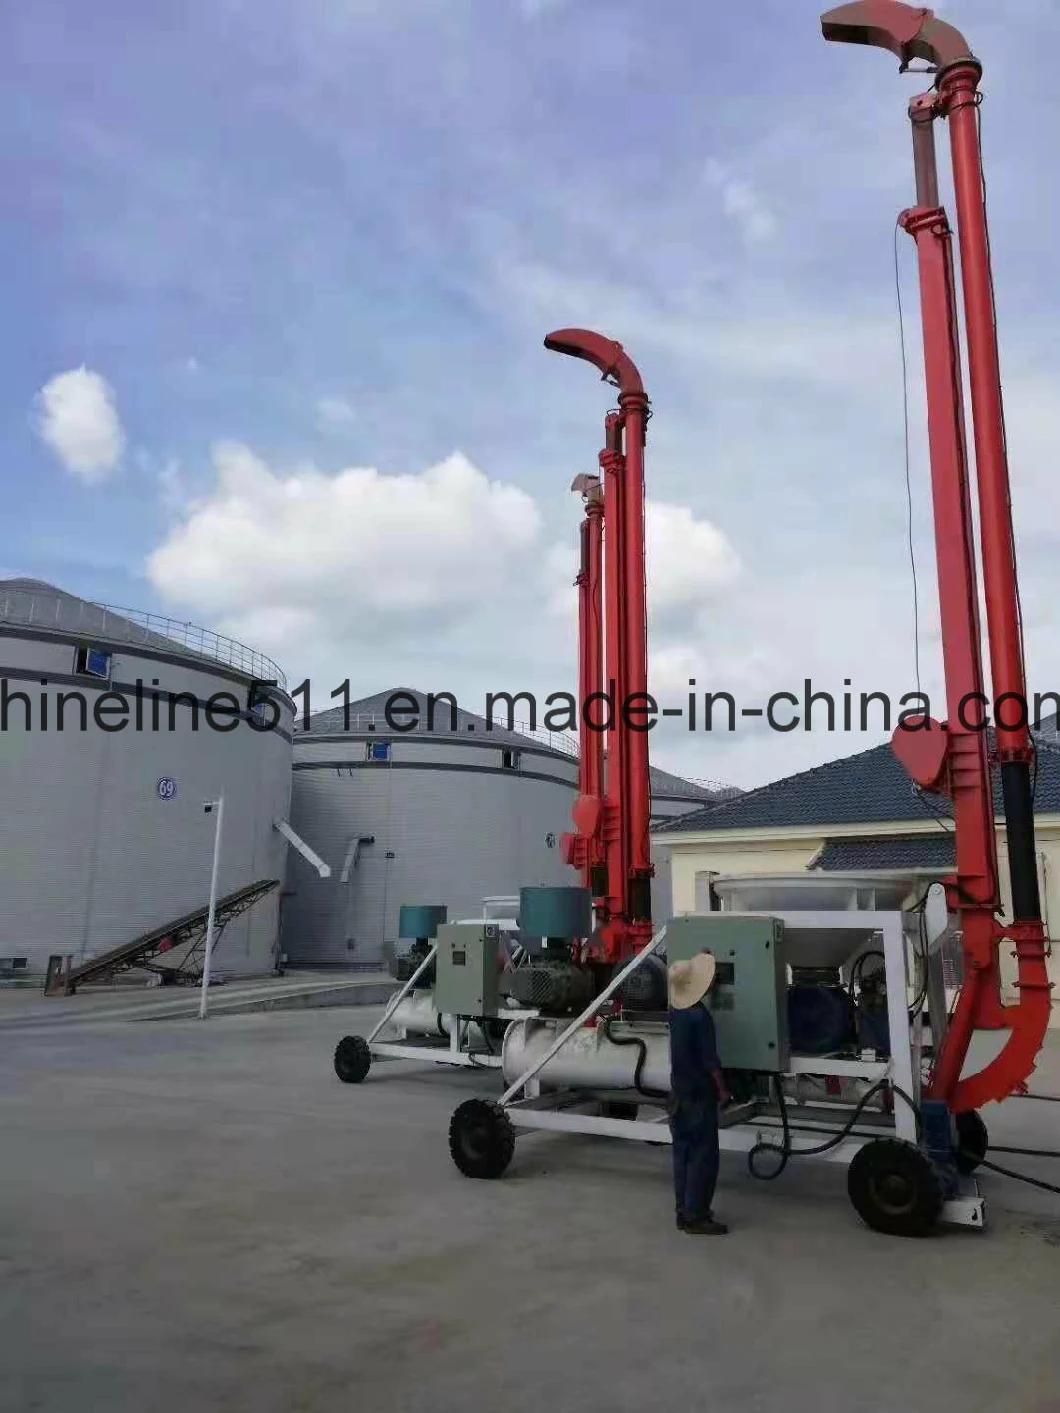 Available New Xiangliang Brand Pneumatic Tube Transport System Port Unloader